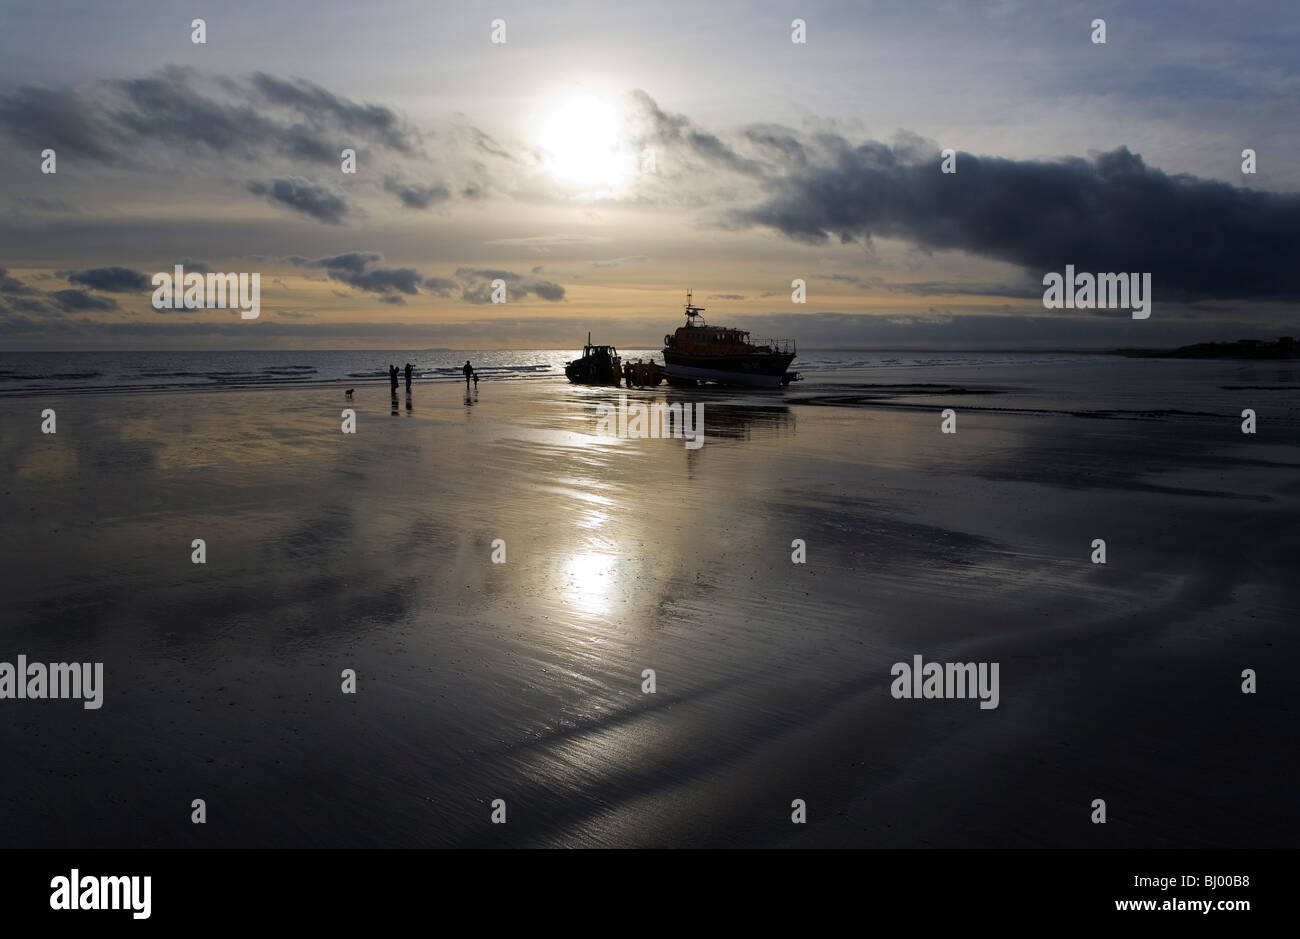 Early dawn Lifeboat Launch by Tractor, Clogher Head, County Louth, Ireland Stock Photo